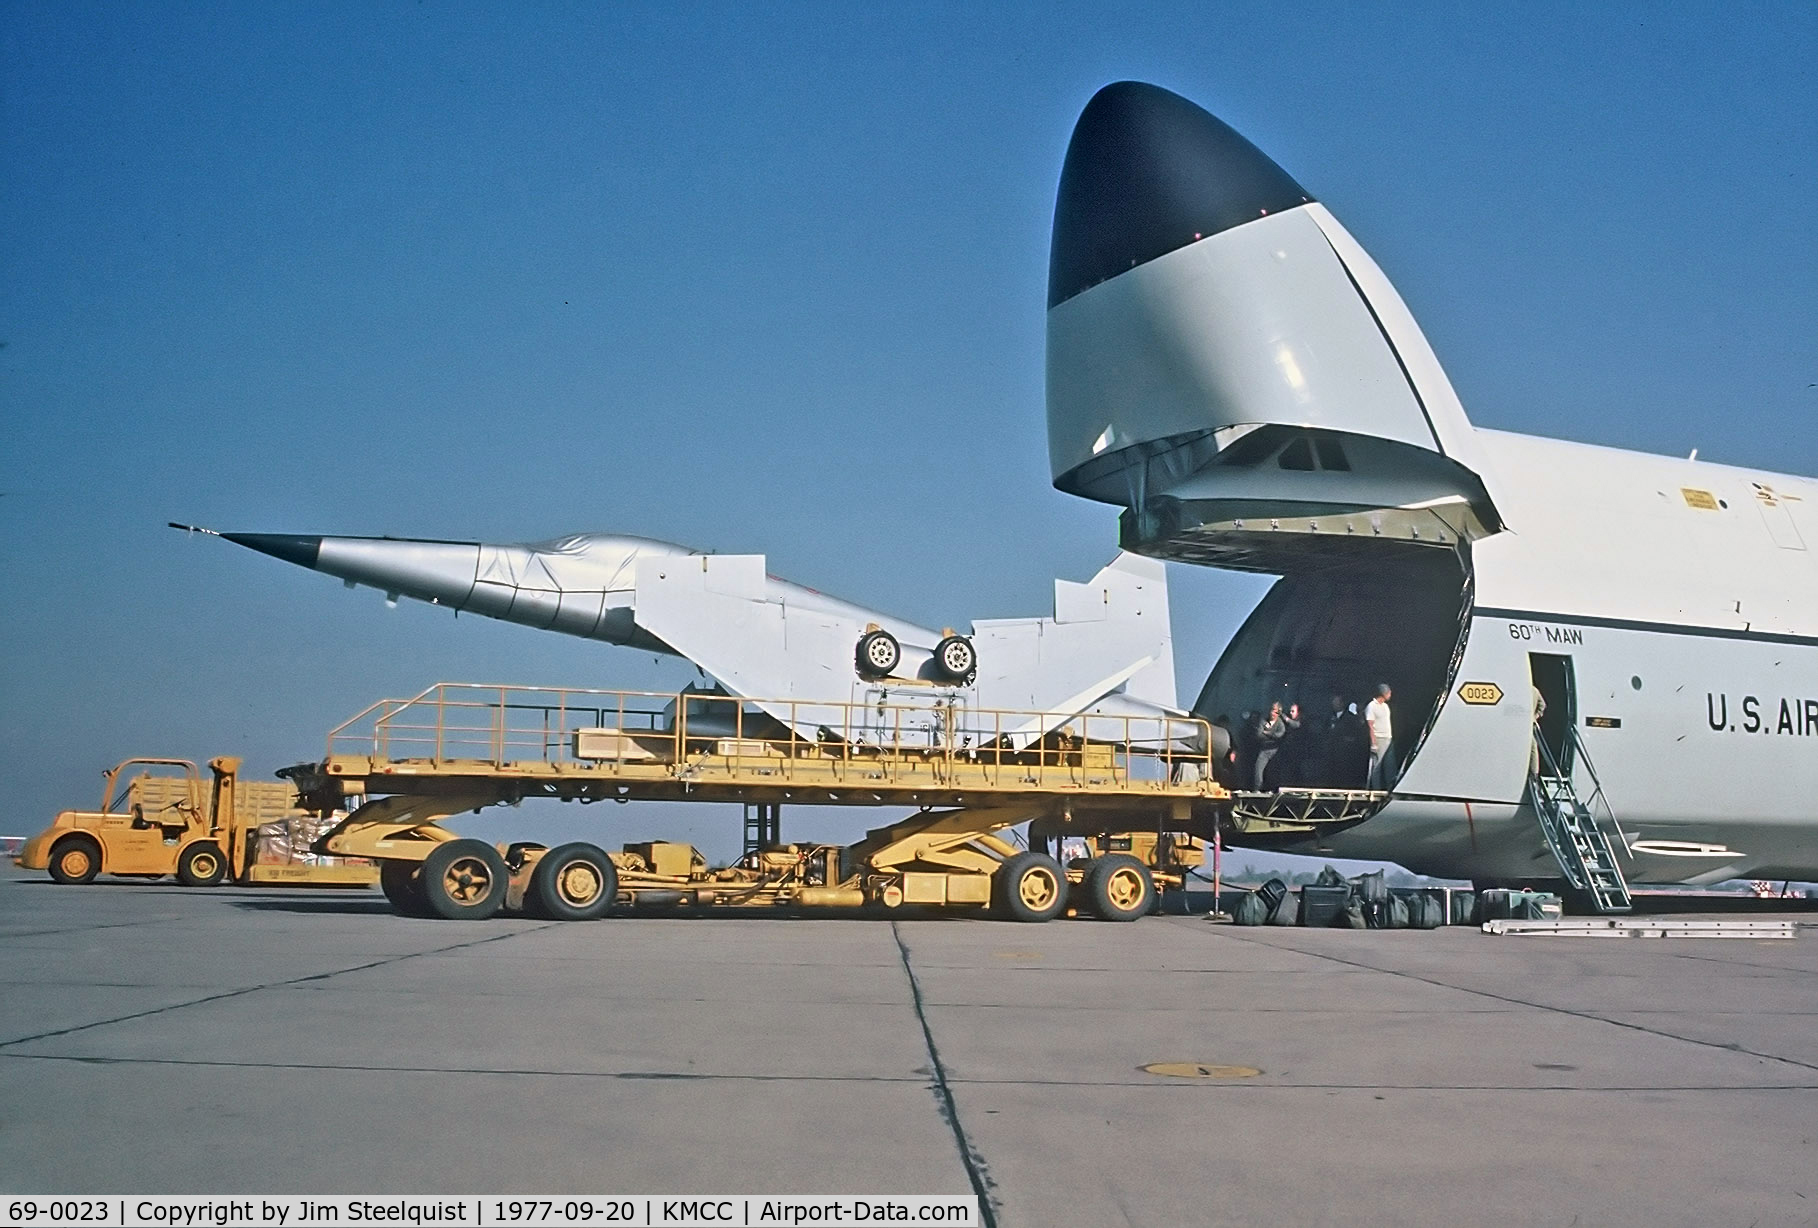 69-0023, 1969 Lockheed C-5A Galaxy C/N 500-0054, Onloading F5 aircraft for delivery to the middle East in 1977.